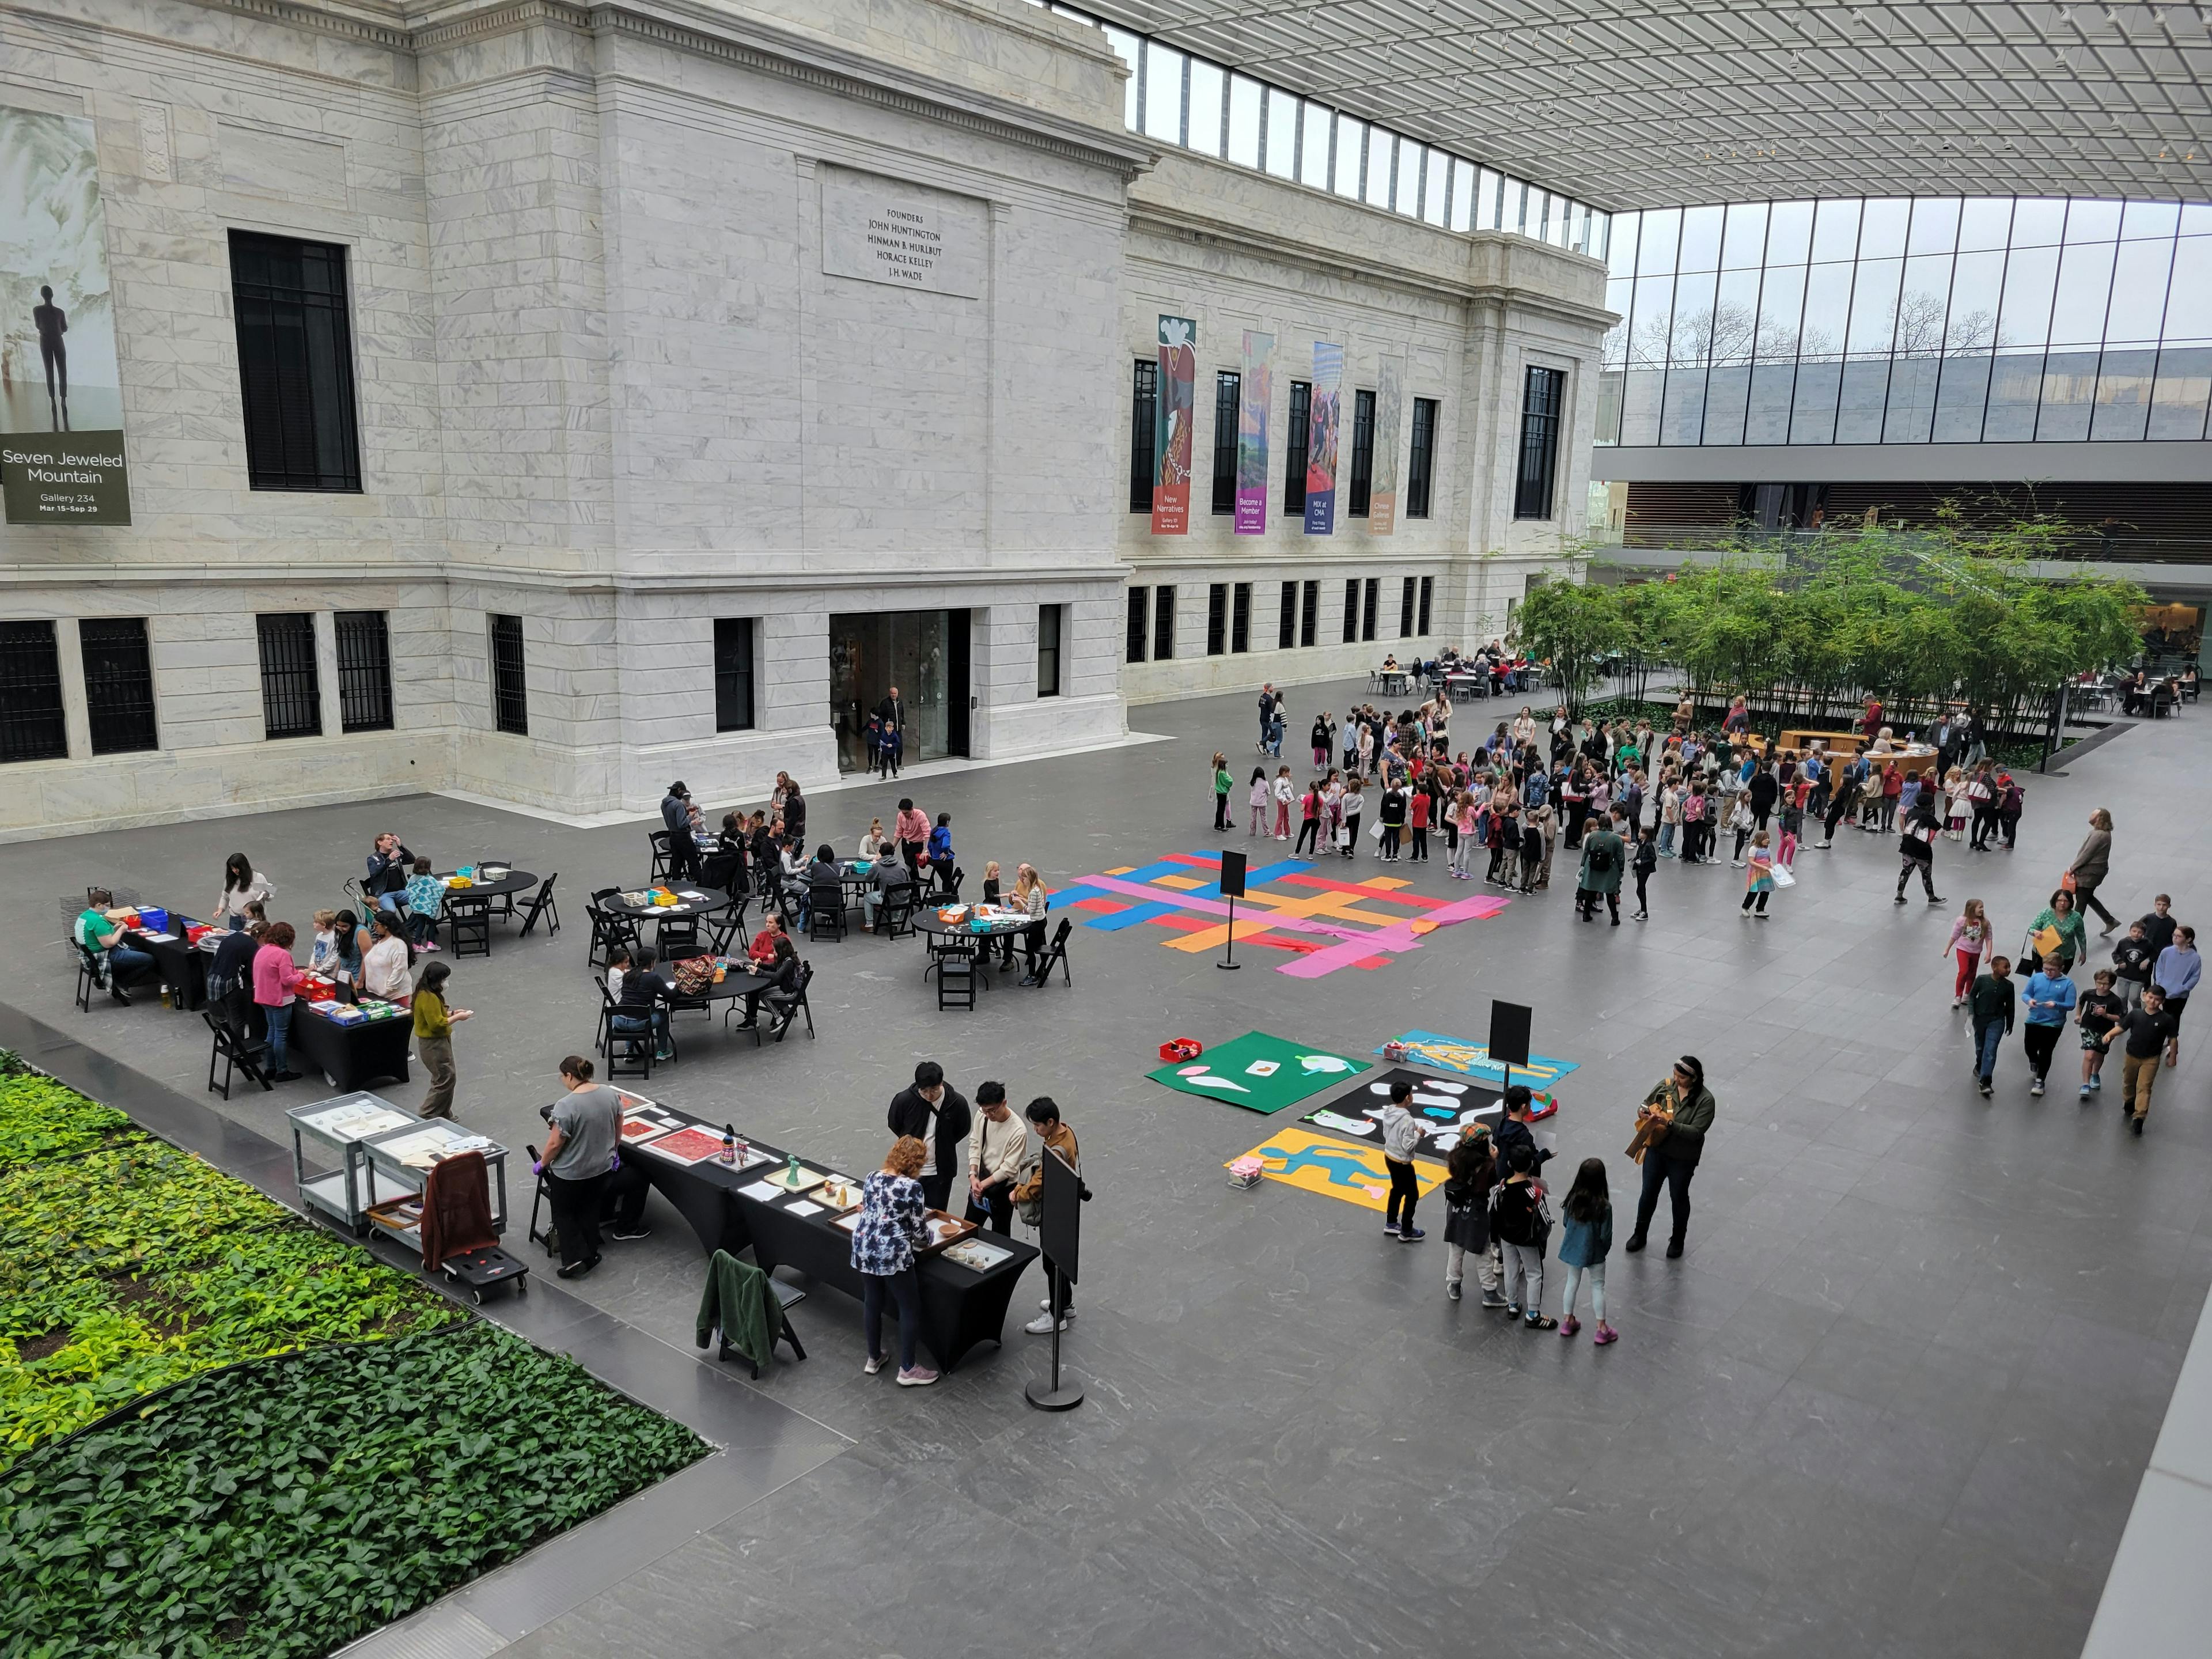 Students and families gather in the museum atrium